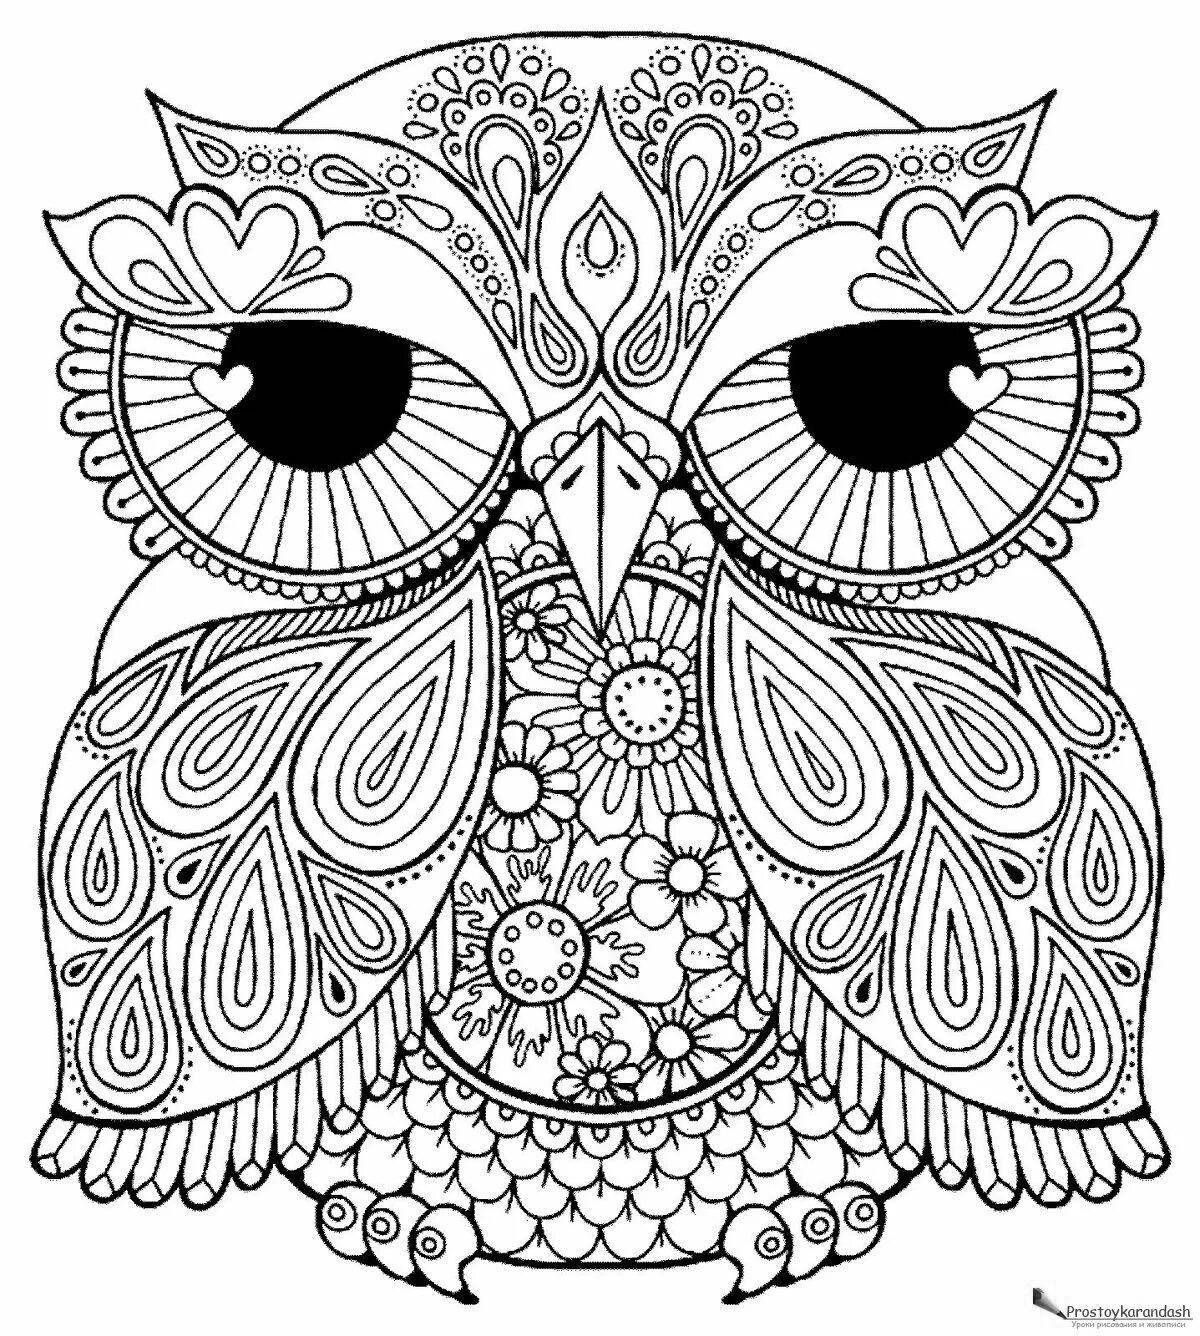 Detailed complex drawings coloring pages